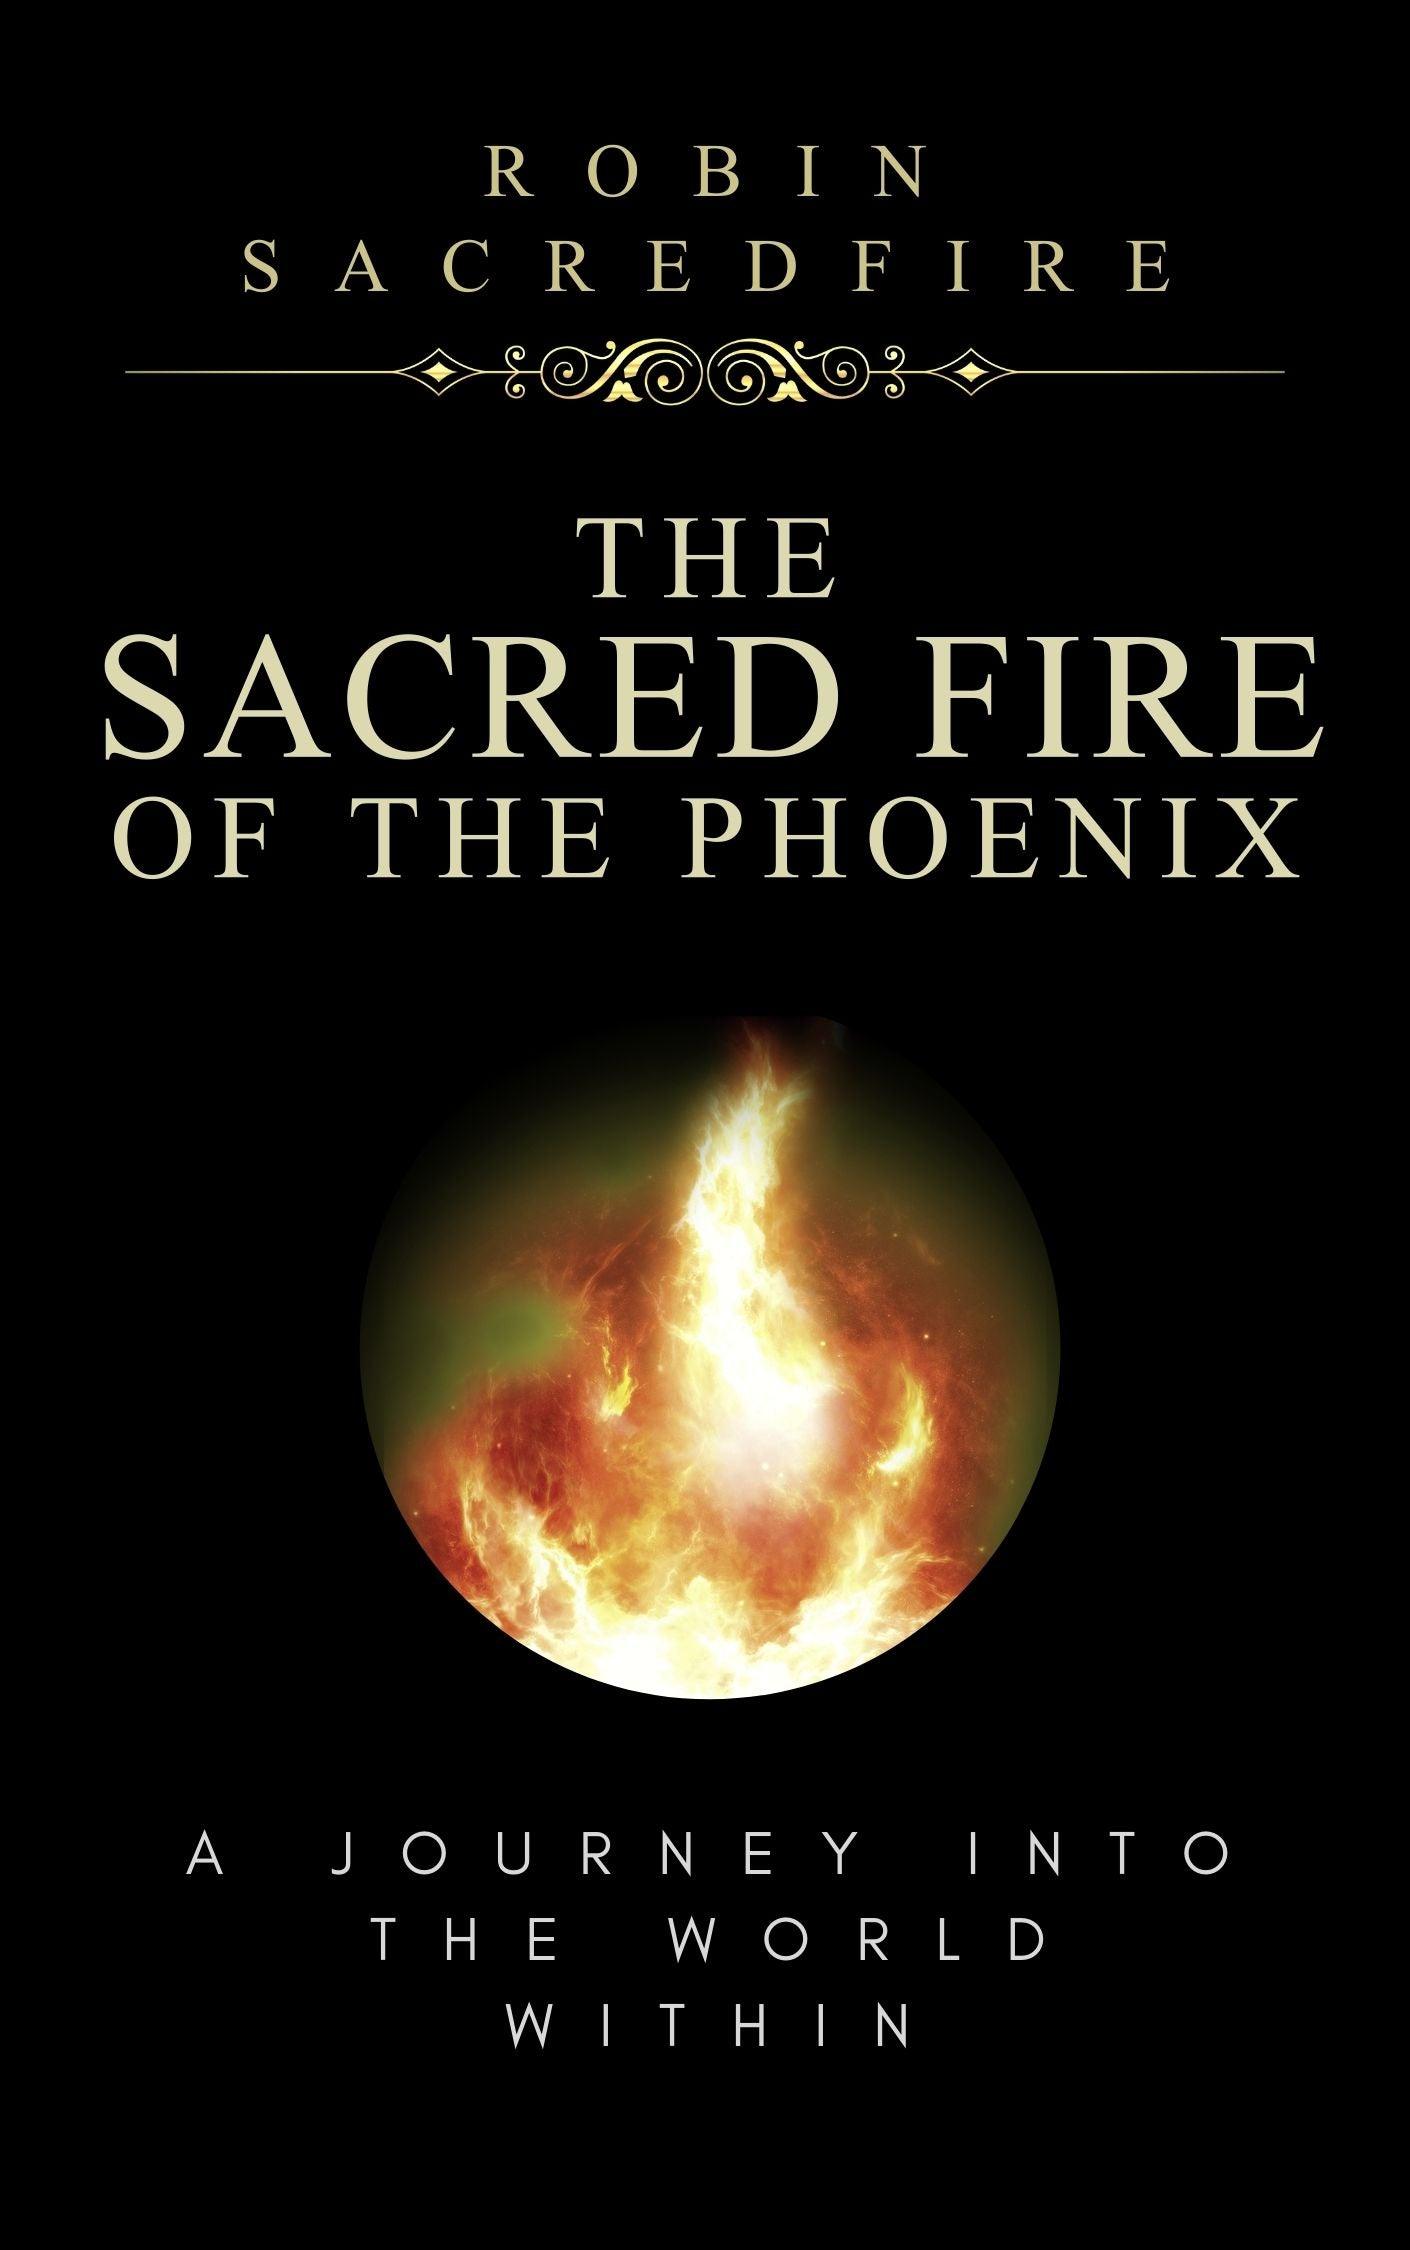 The Sacred Fire of the Phoenix